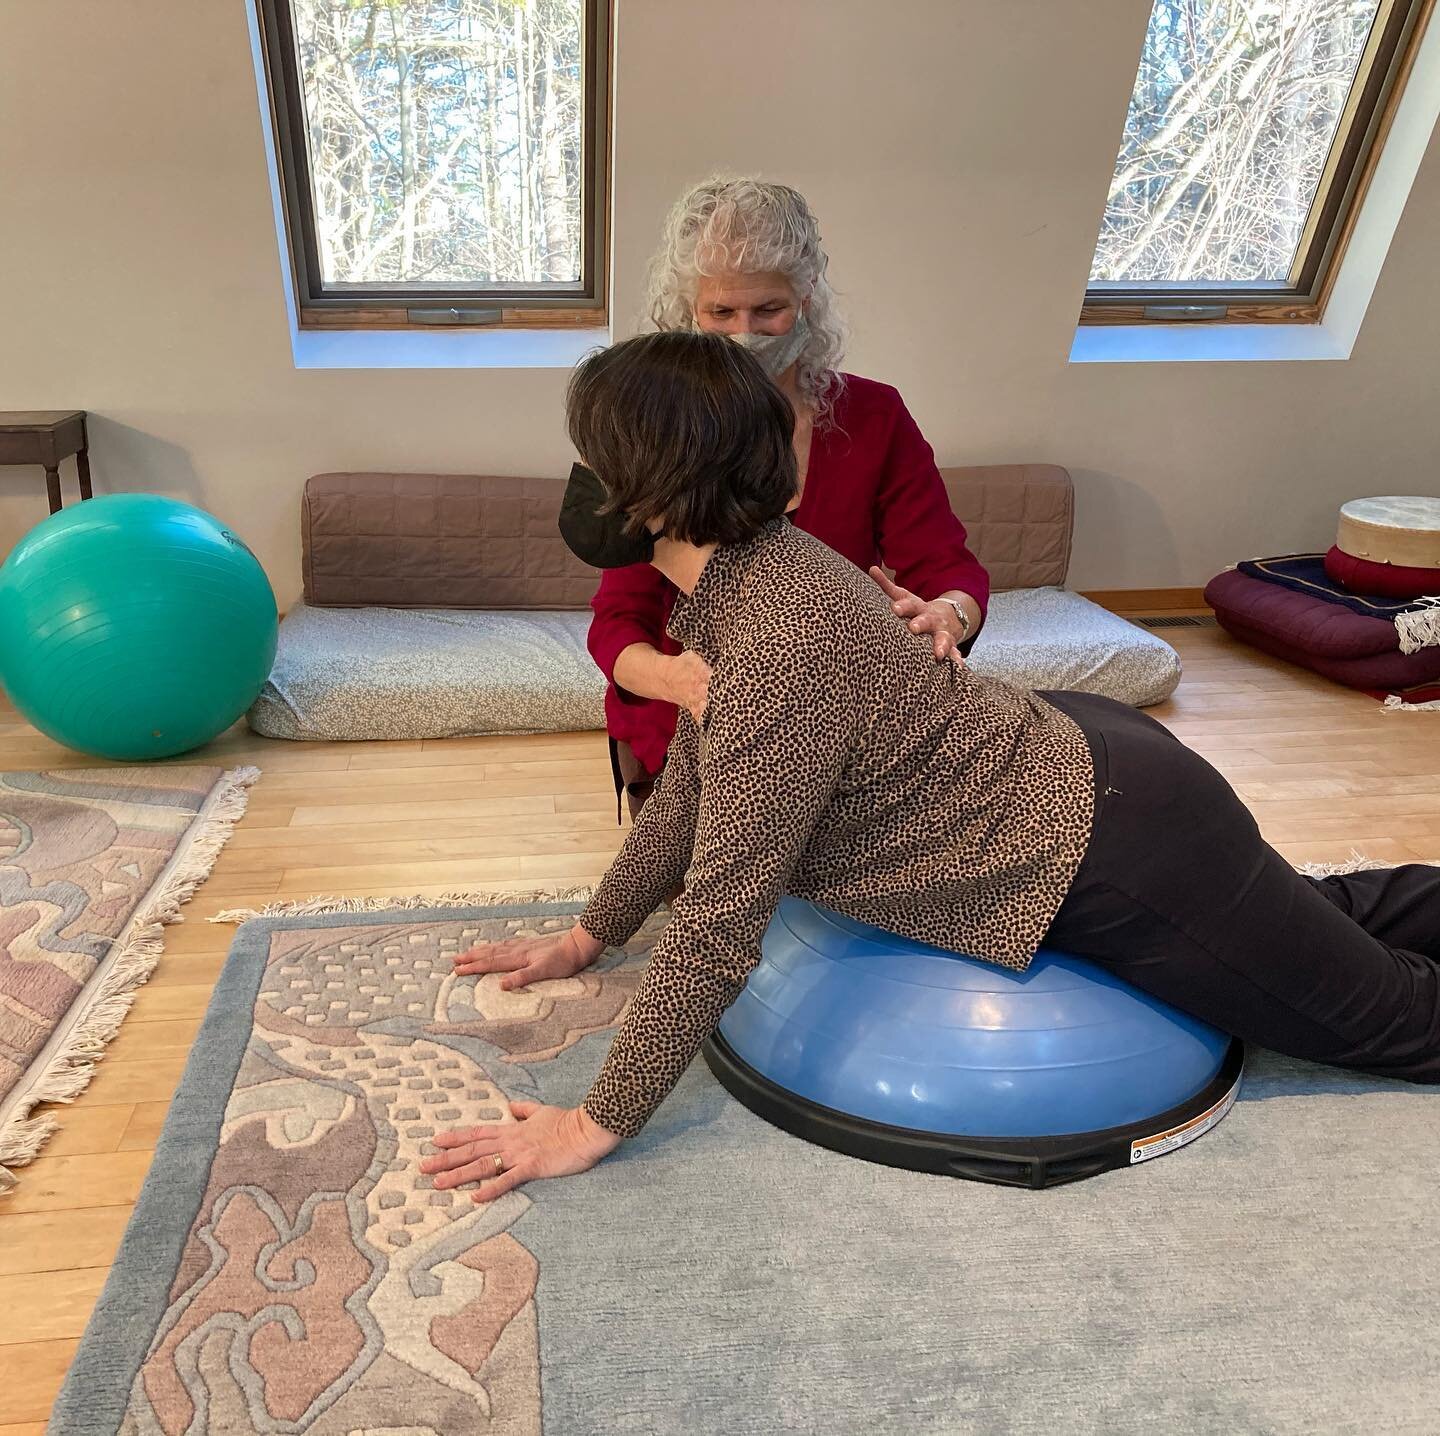 Playing in my studio with ways of experiencing the body and finding support and ease in movement. Visit my website thebodyminddance.com for more information about what I do. #thebodyminddance #bodymindcentering #somaticmovementtherapy #wellness #body